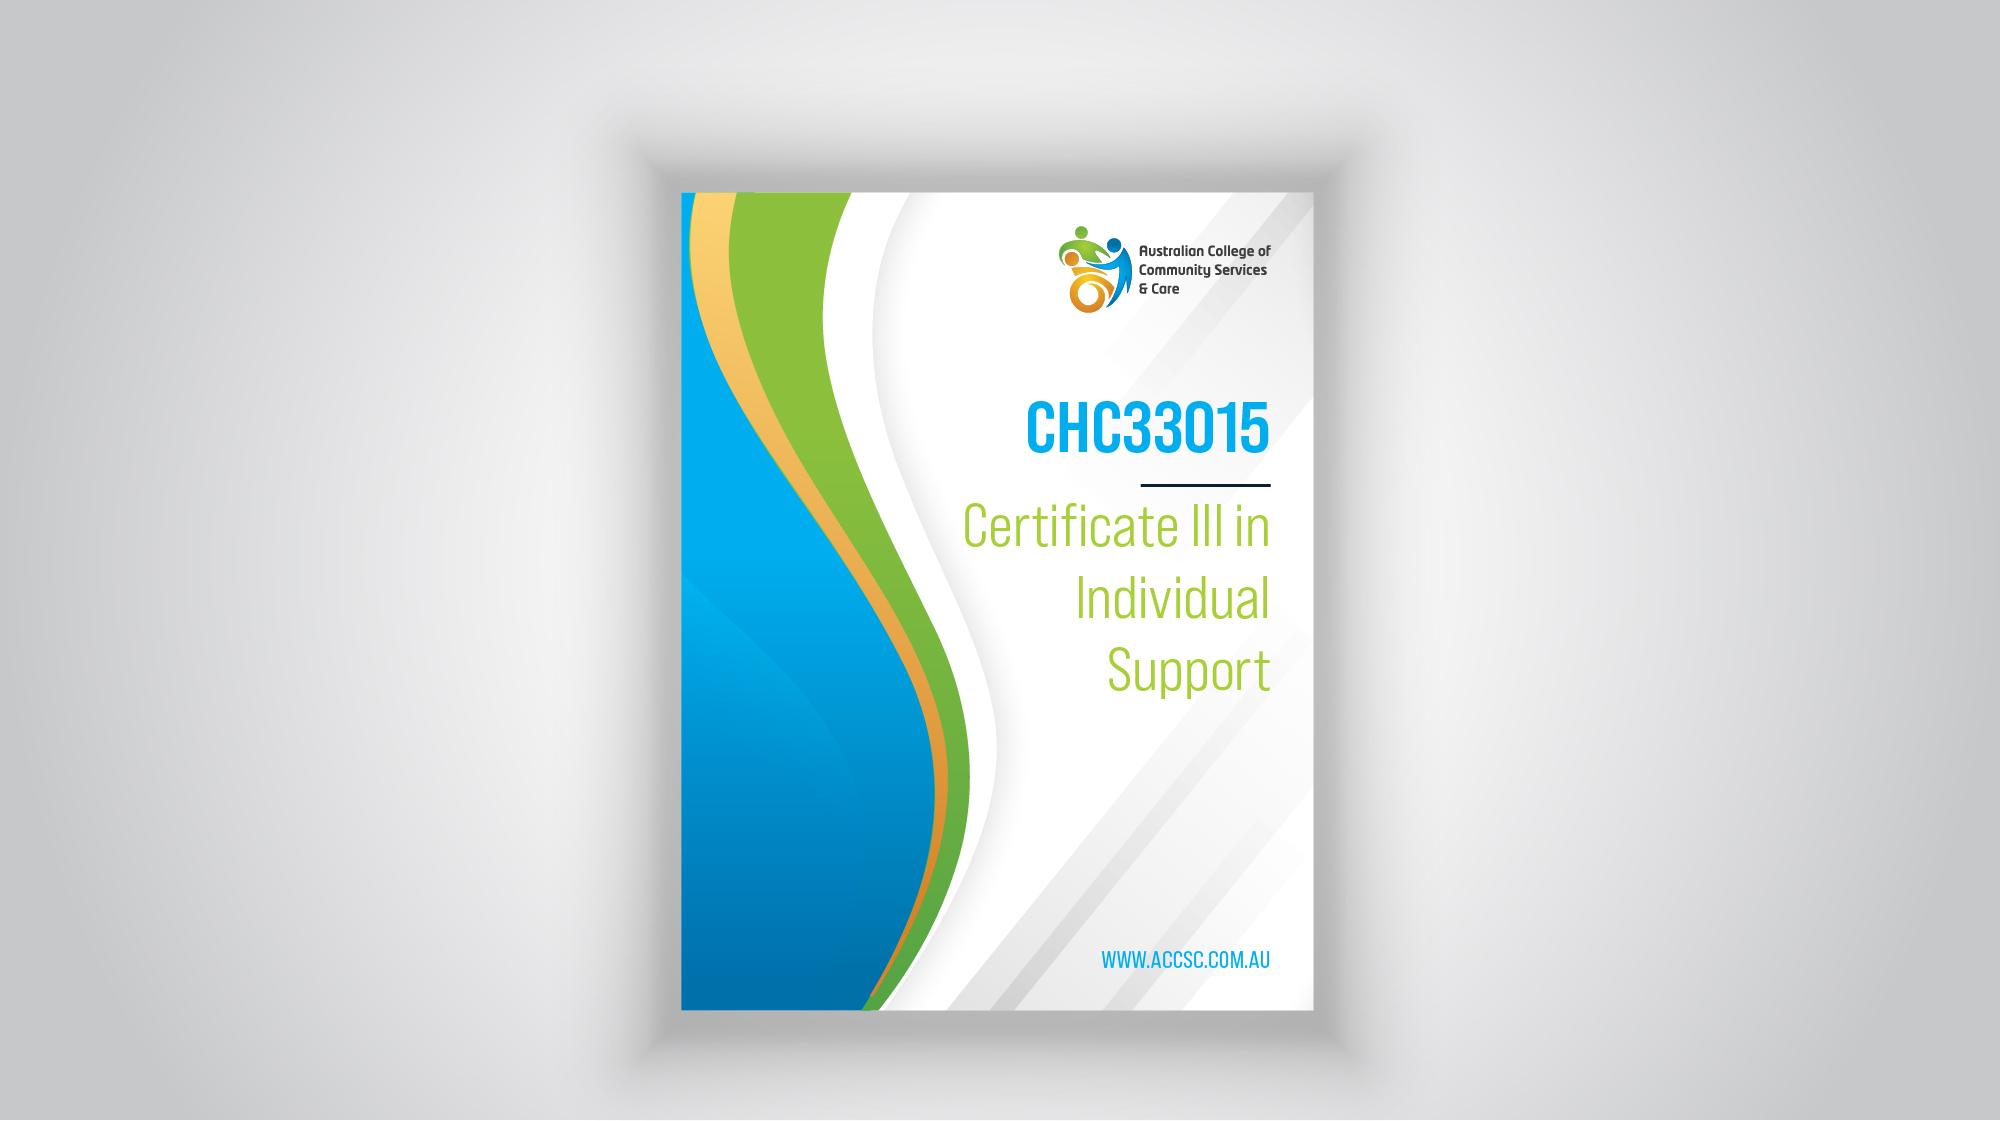 $899 CHC33015 Certificate III in Individual Support ACCSC